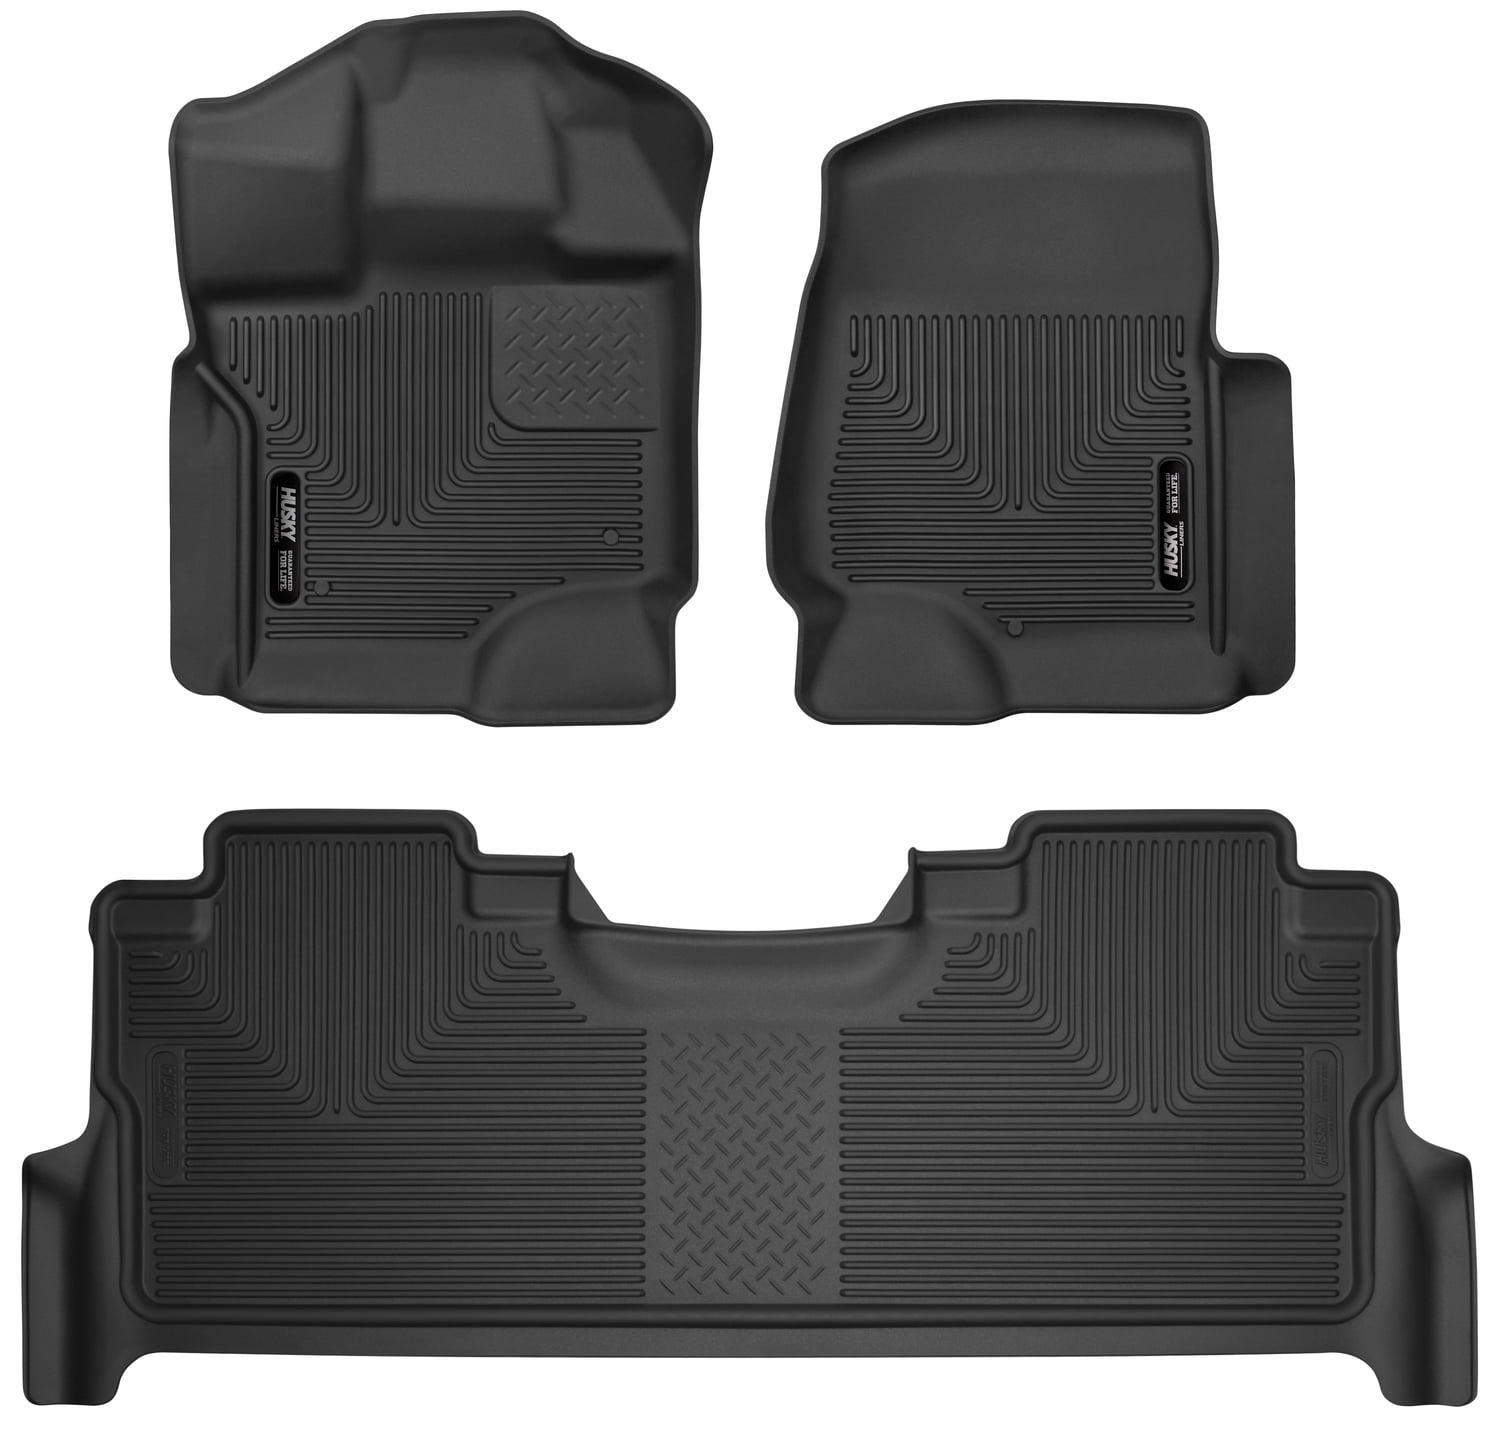 33852 Husky Liners Floor Mats Front New Gray for F250 Truck F350 Ford 2000-2007